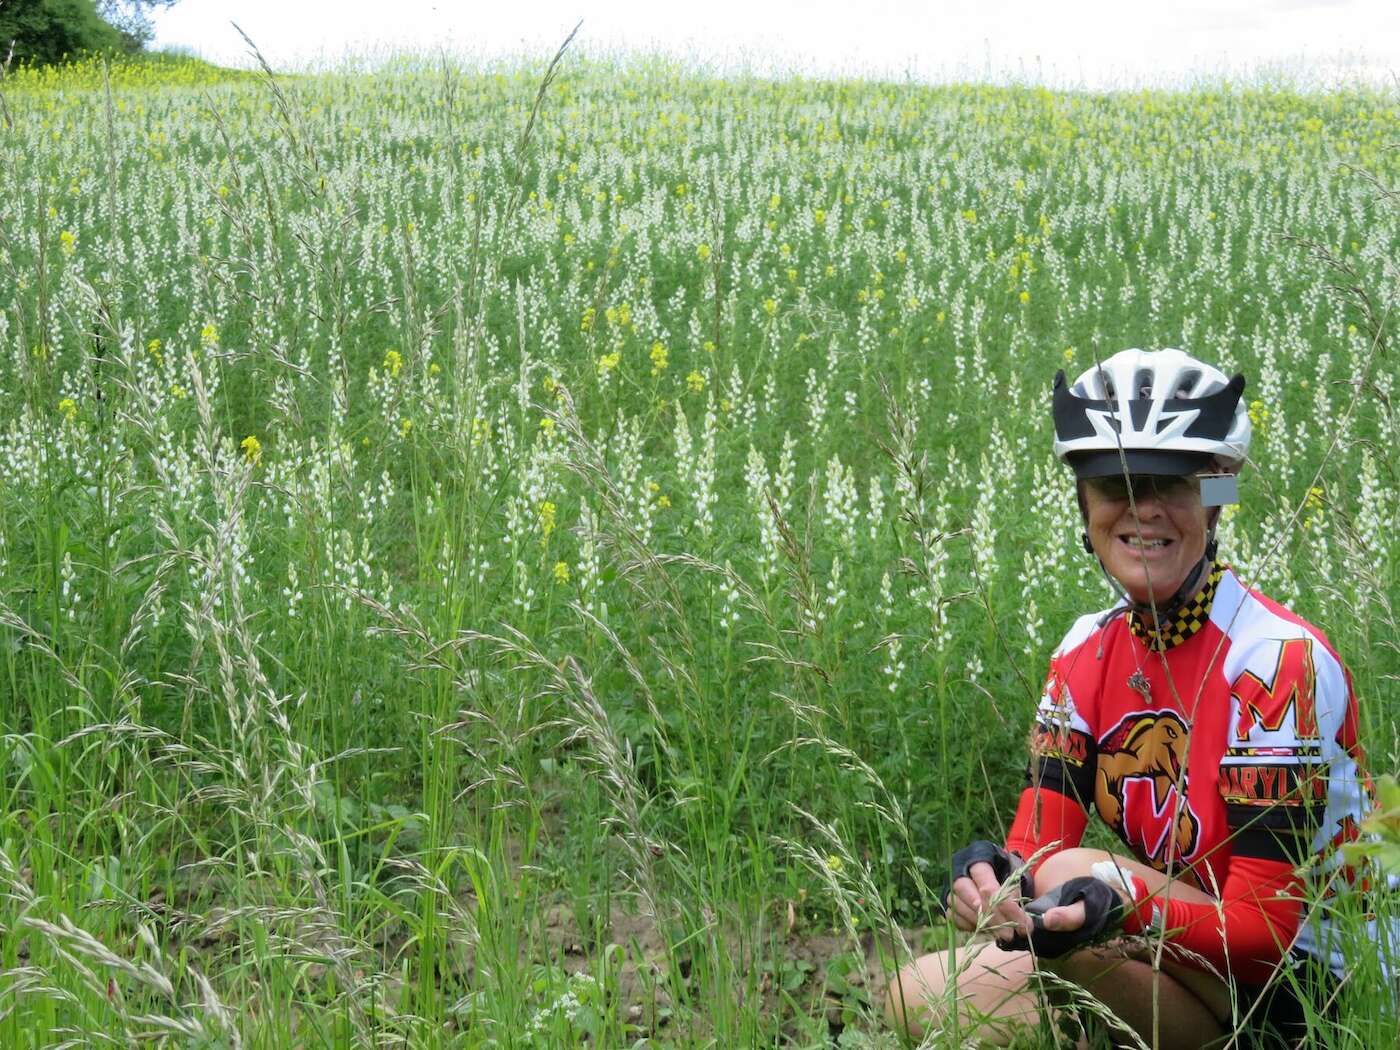 Ann takes a break for a picture in the beautiful fields along the route